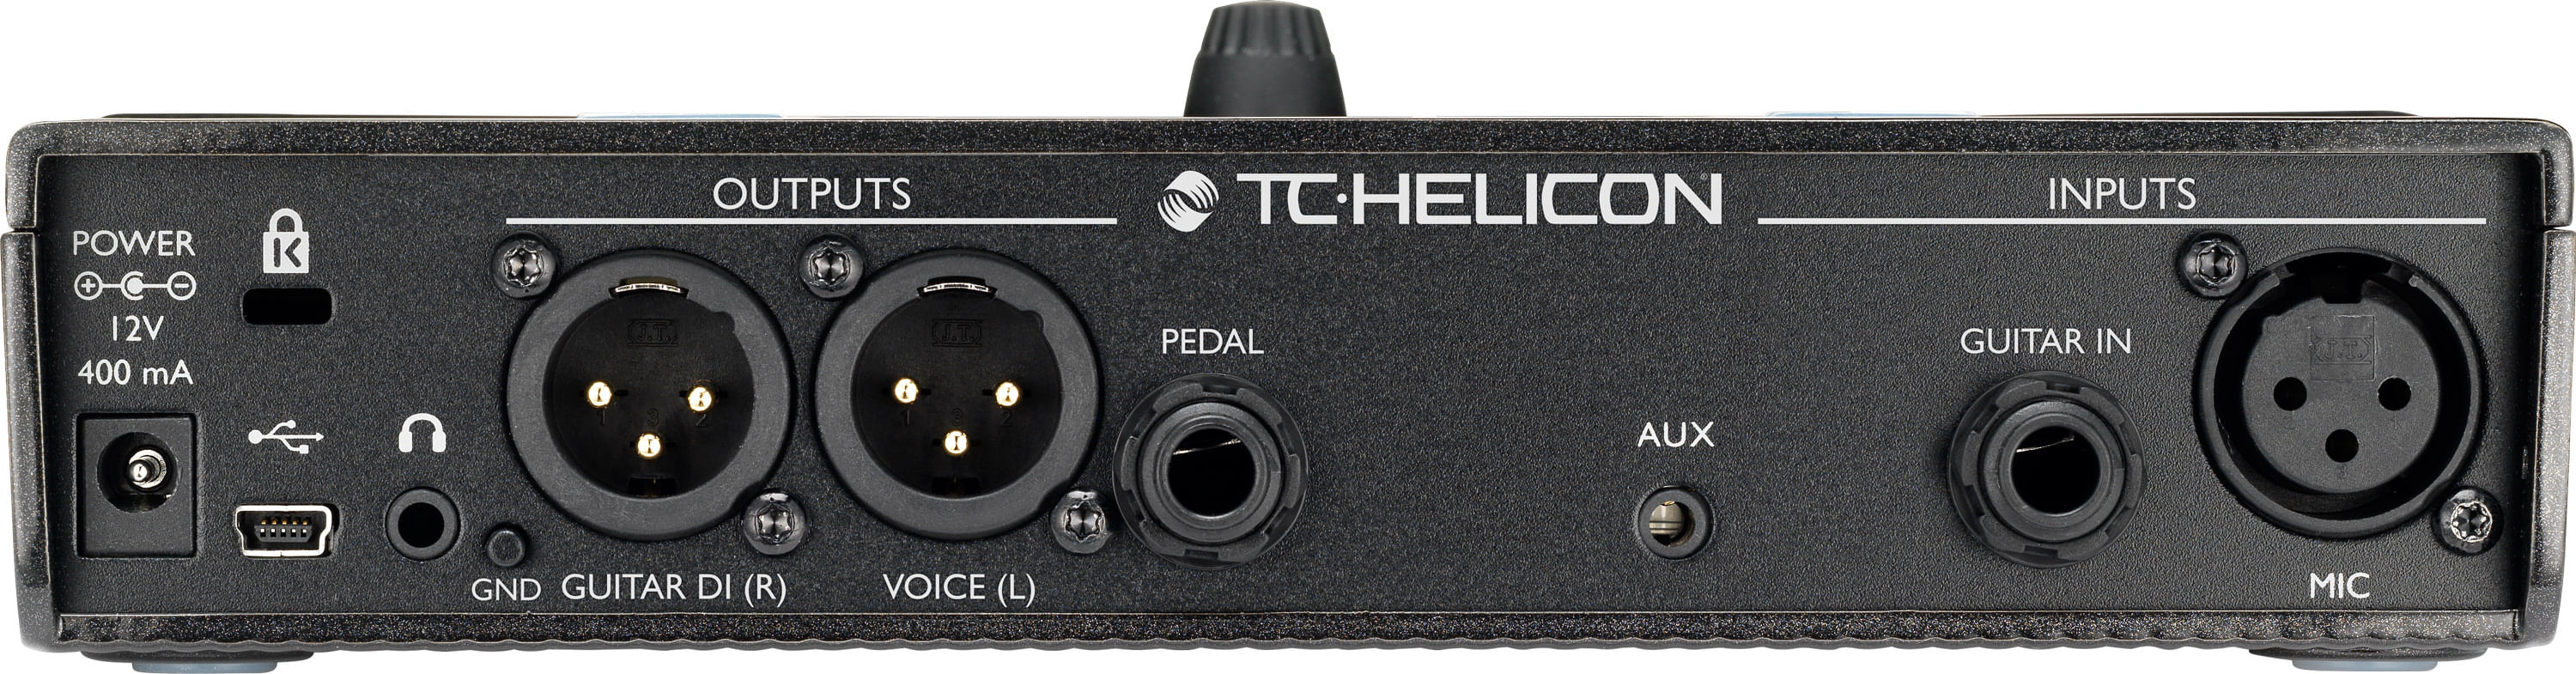 TC HELICON Play Acoustic-